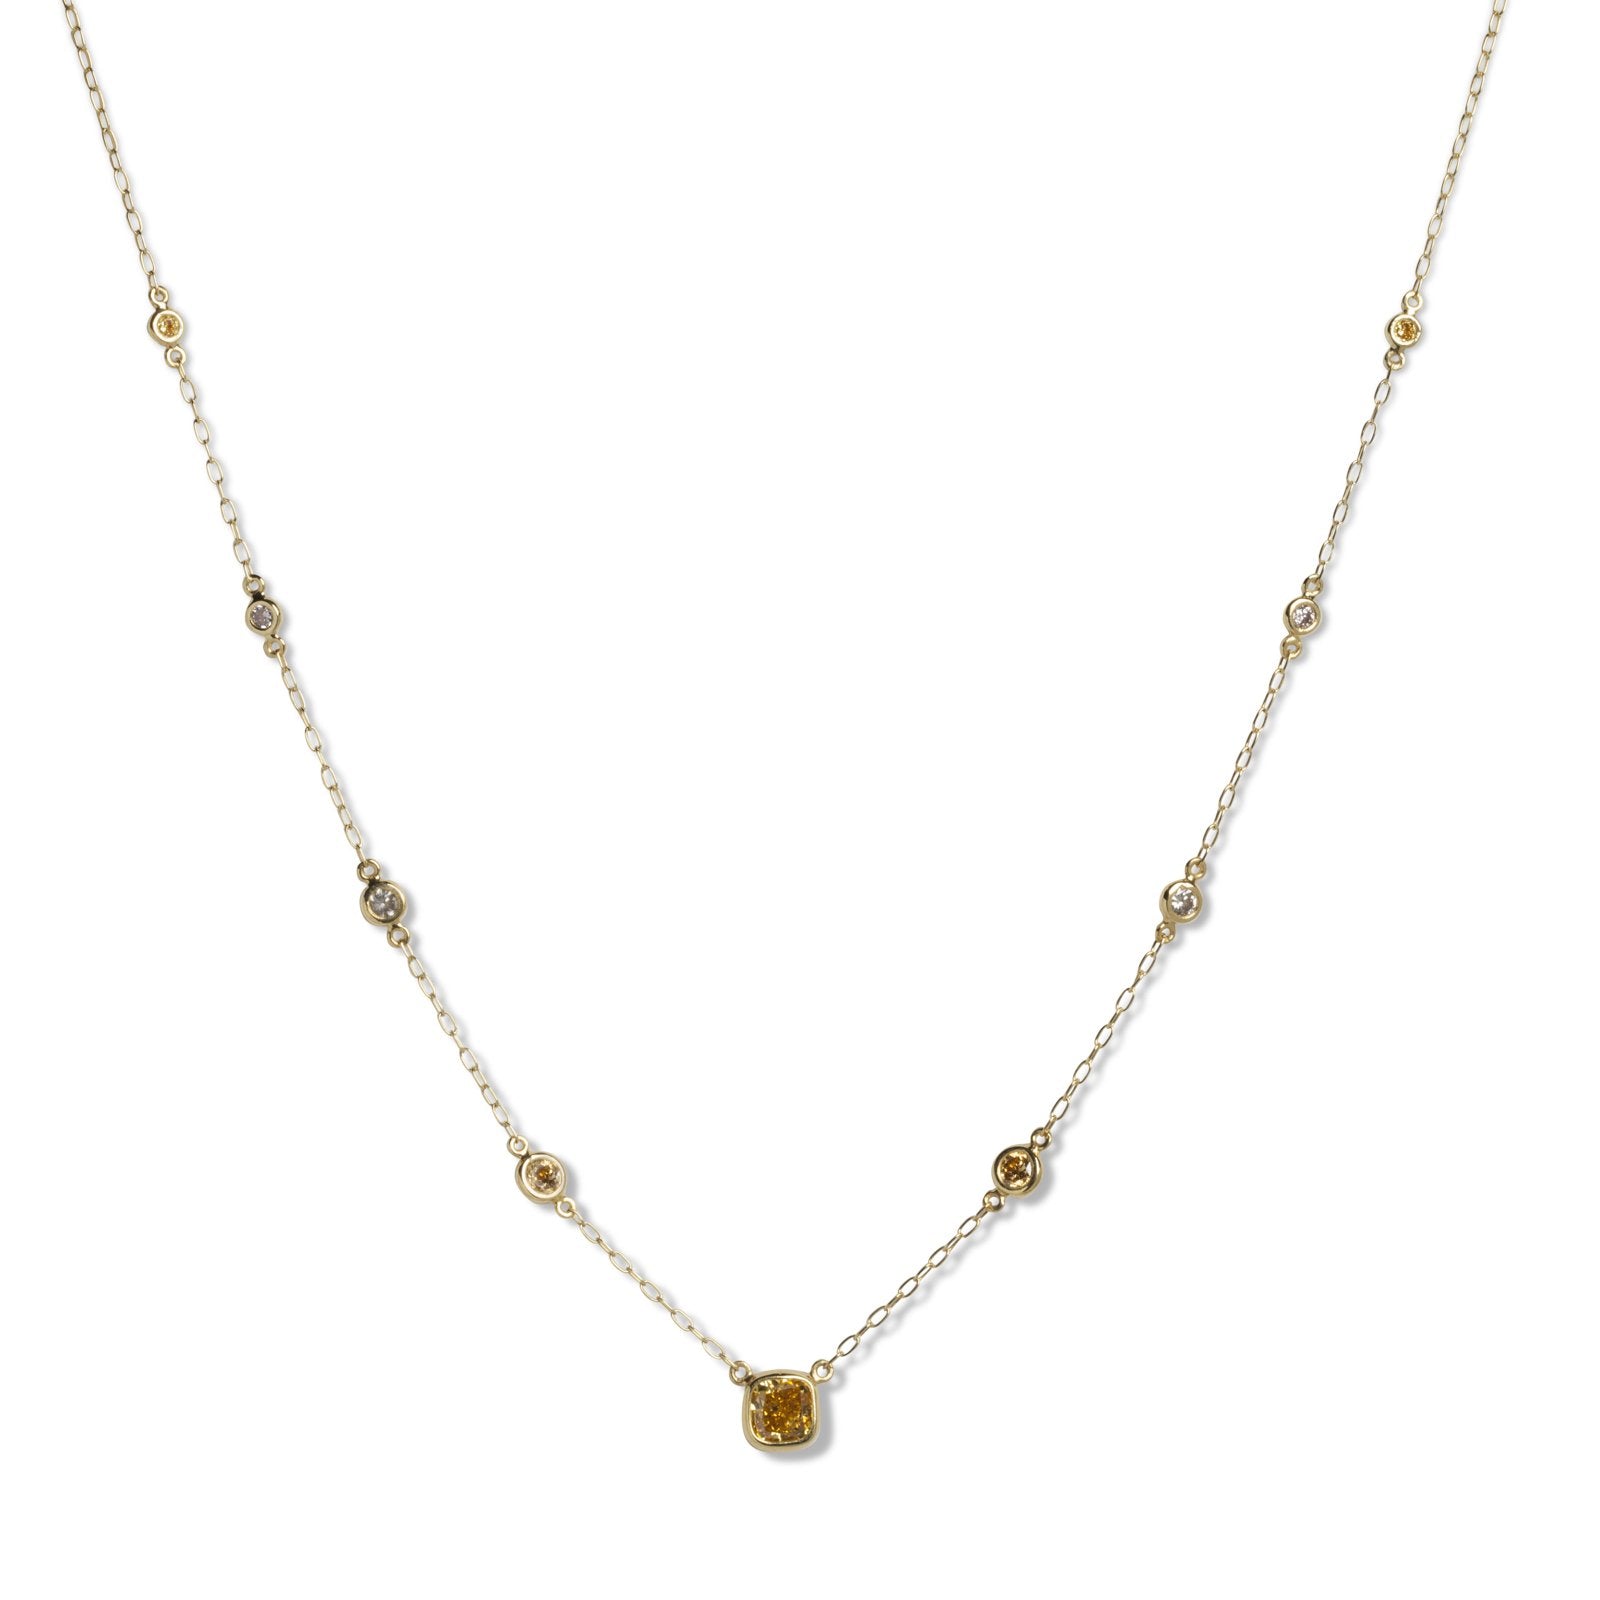 18KT YELLOW GOLD FANCY COLORED DIAMOND NECKLACE